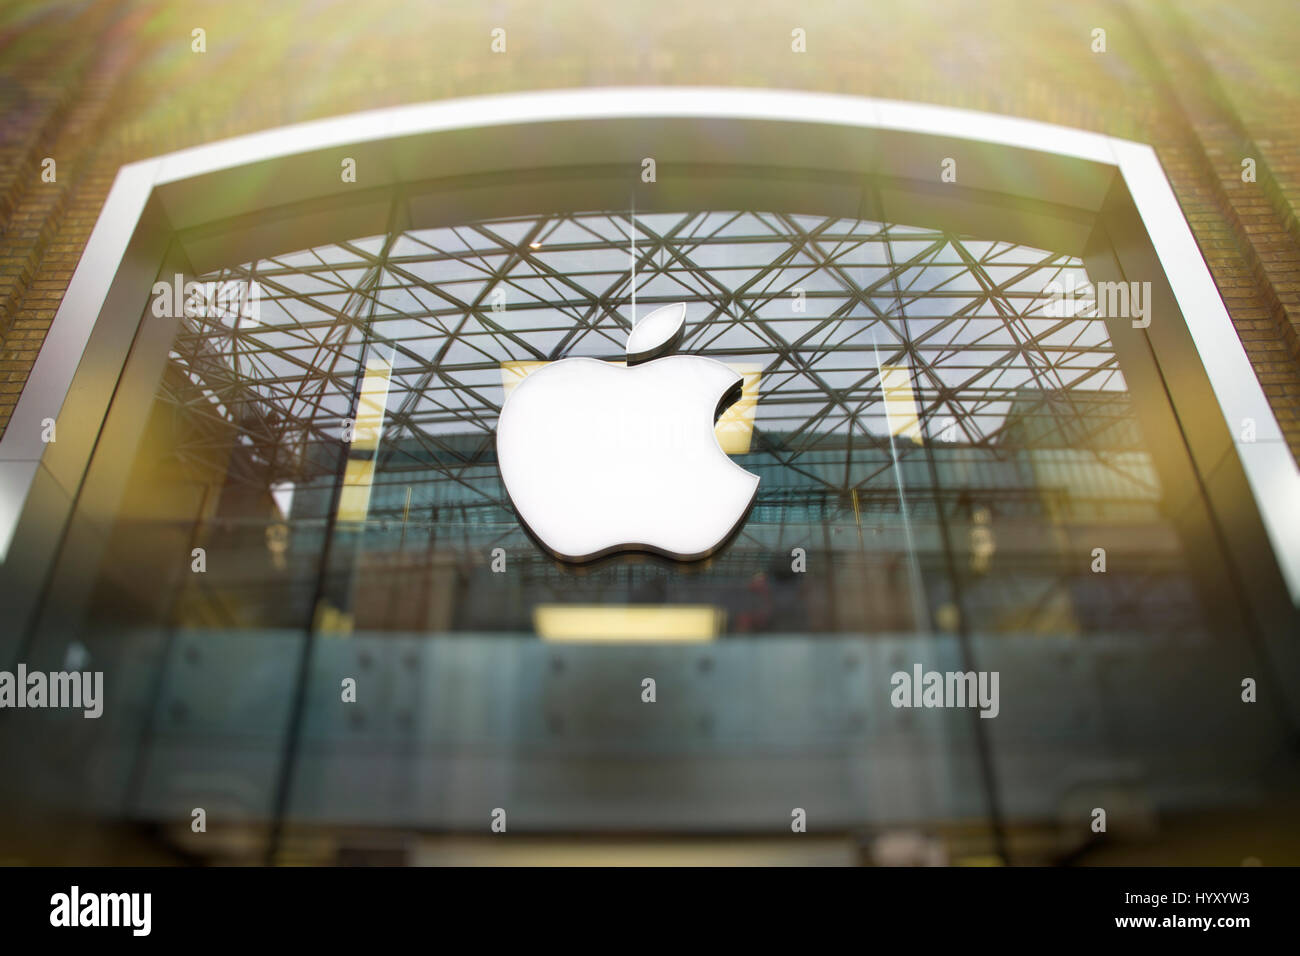 Font of Apple store, top technology brand globally Beautiful natural light, clear clean logo. Stock Photo